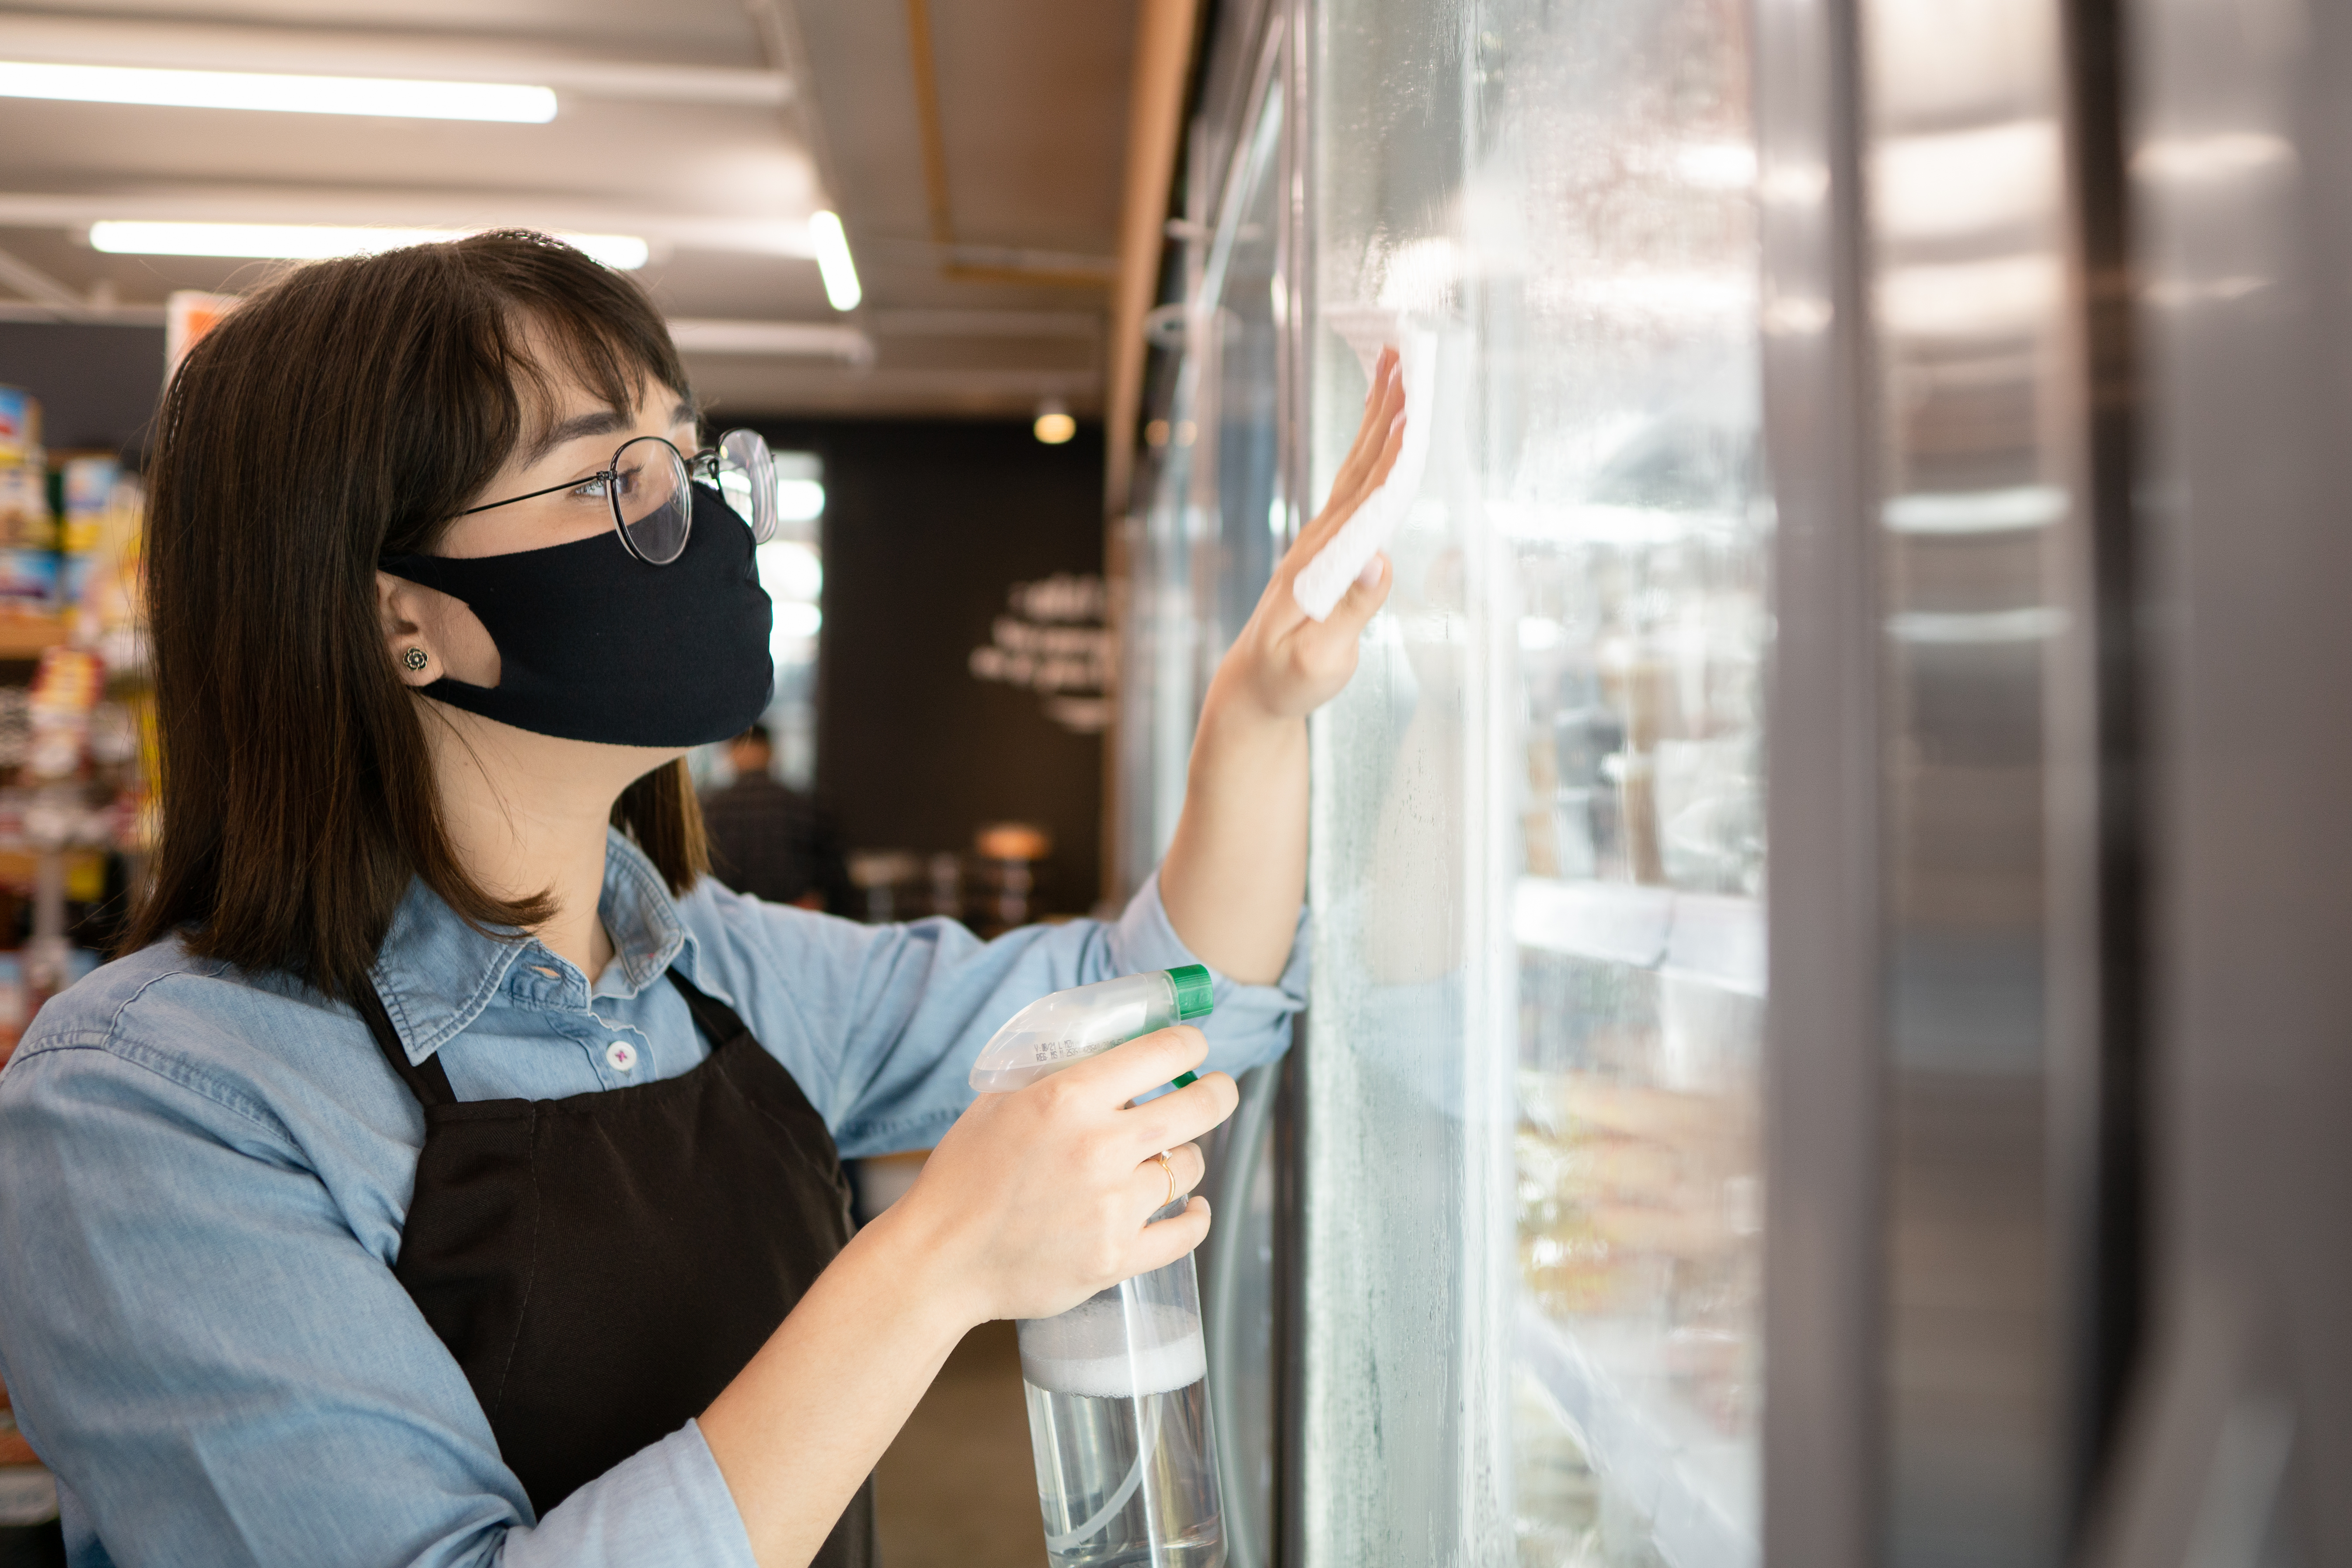 Cleaning staff spraying and wiping glass on fridge section